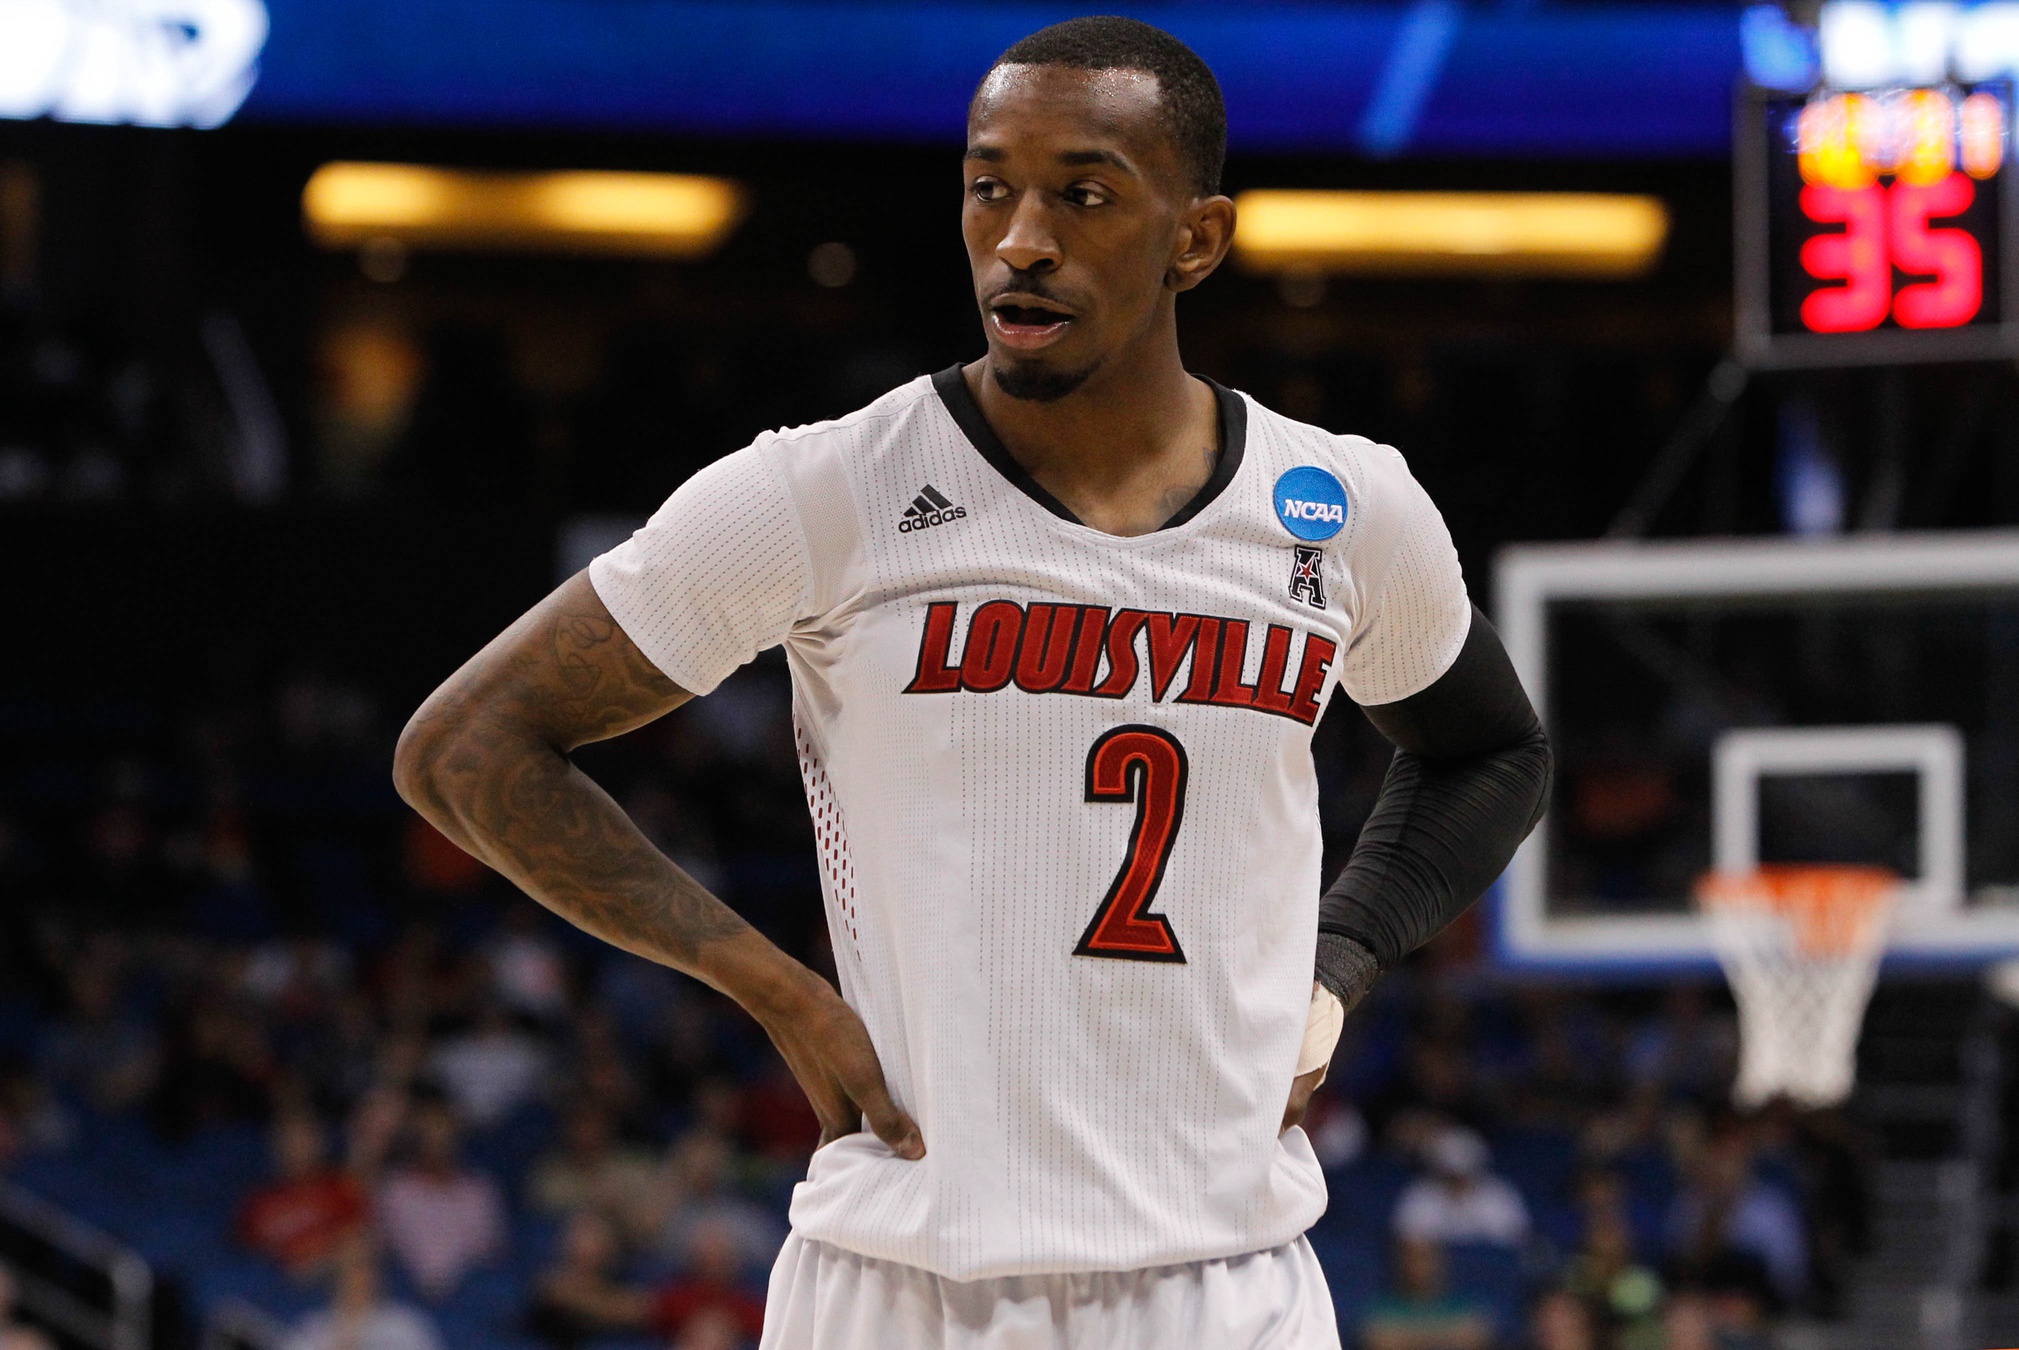 Louisville basketball: The history behind each player's jersey number